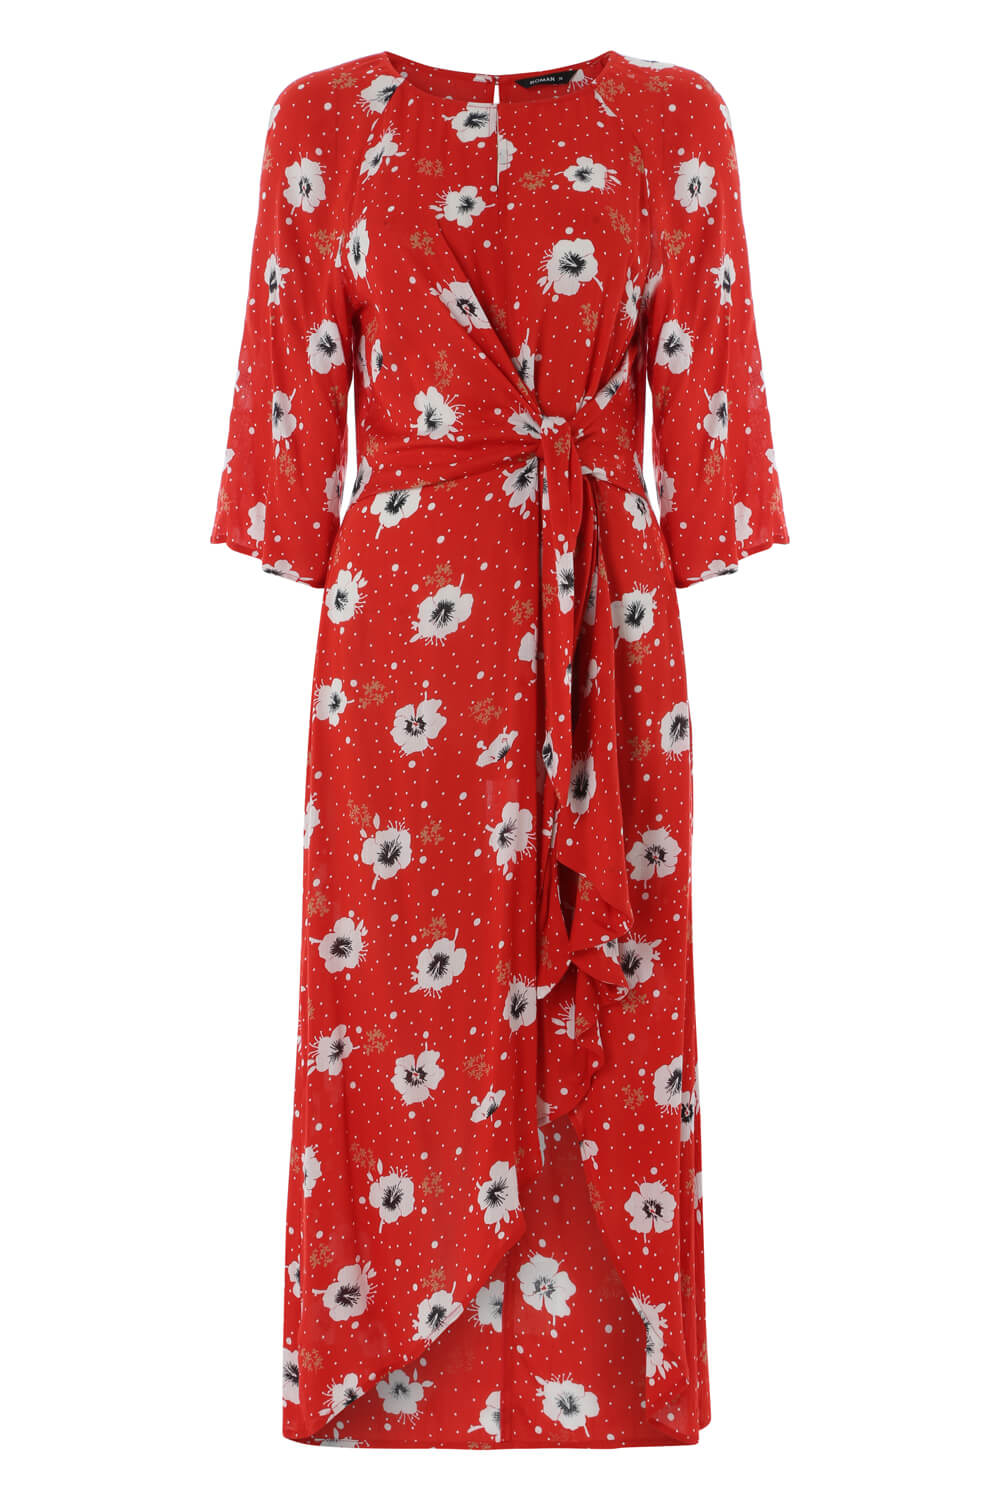 Red Floral Knot Waist Maxi Dress, Image 5 of 5